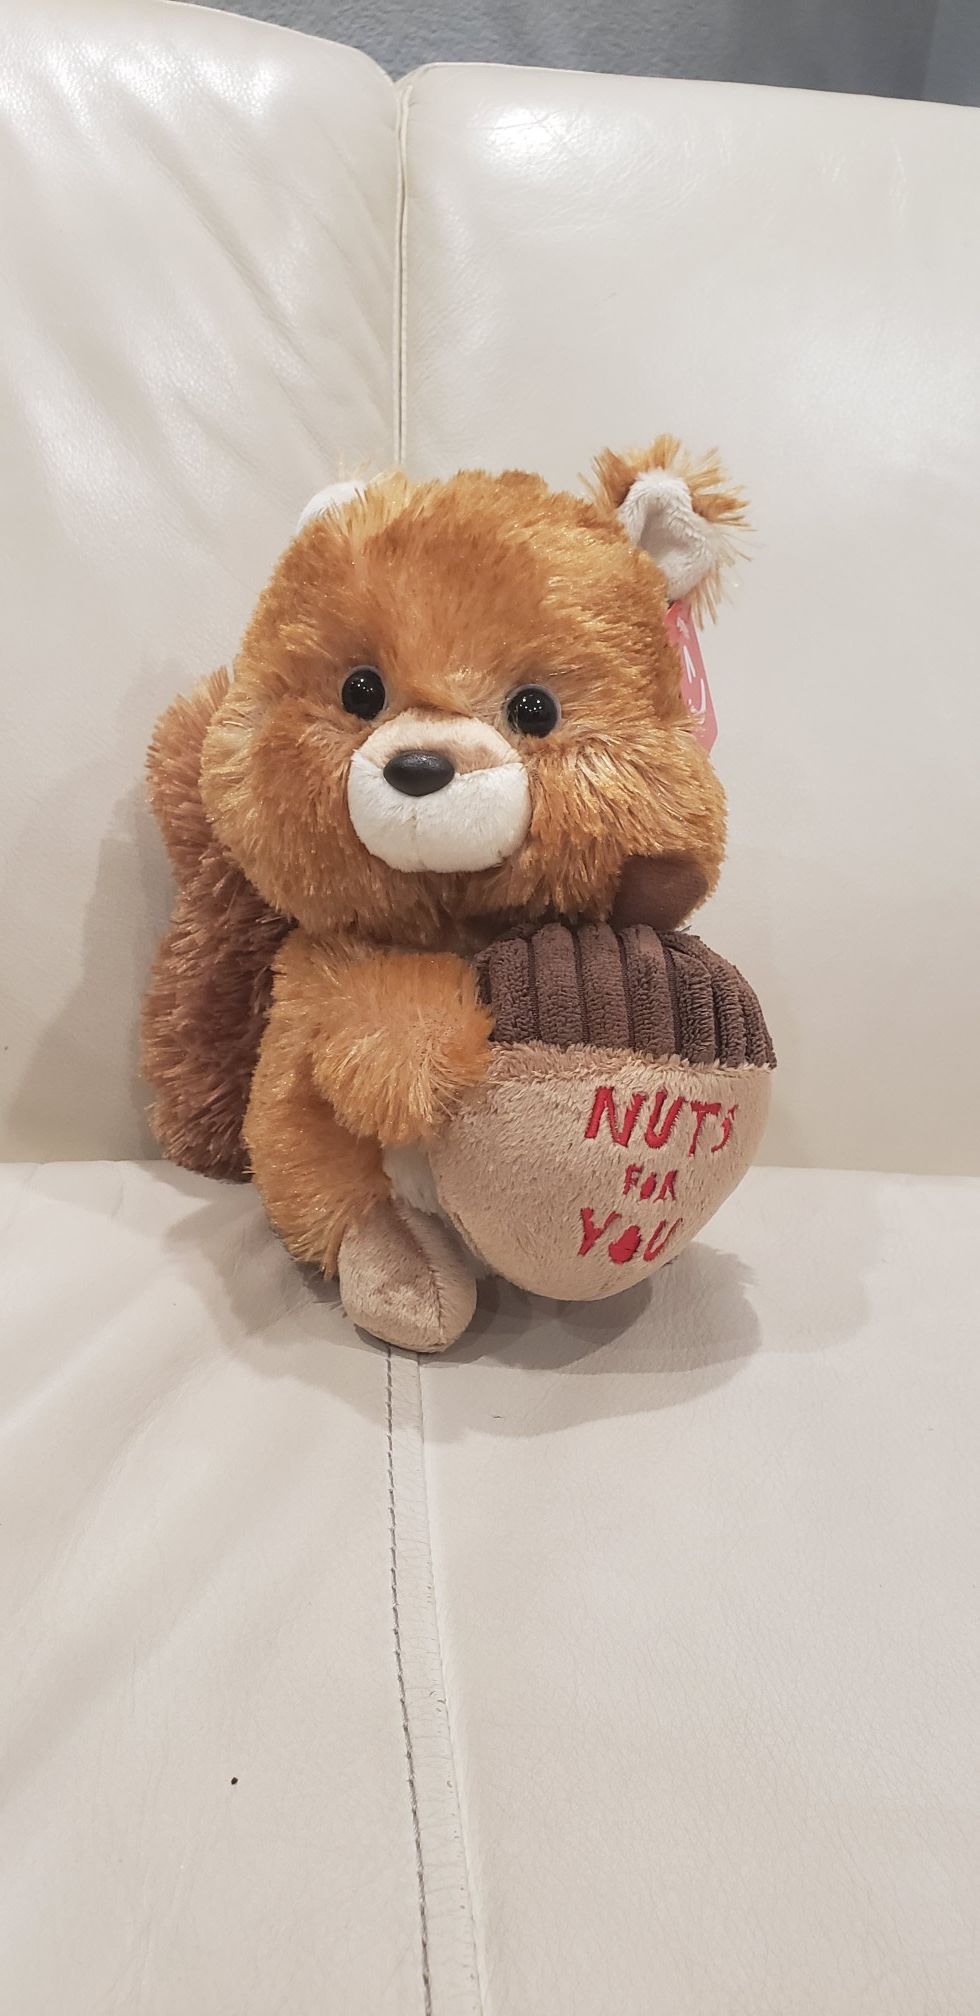 Nuts for you Valentine's day squirrel animal 8" tall cute stuffed animal with an acorn. Very soft material. Brand new with tag.